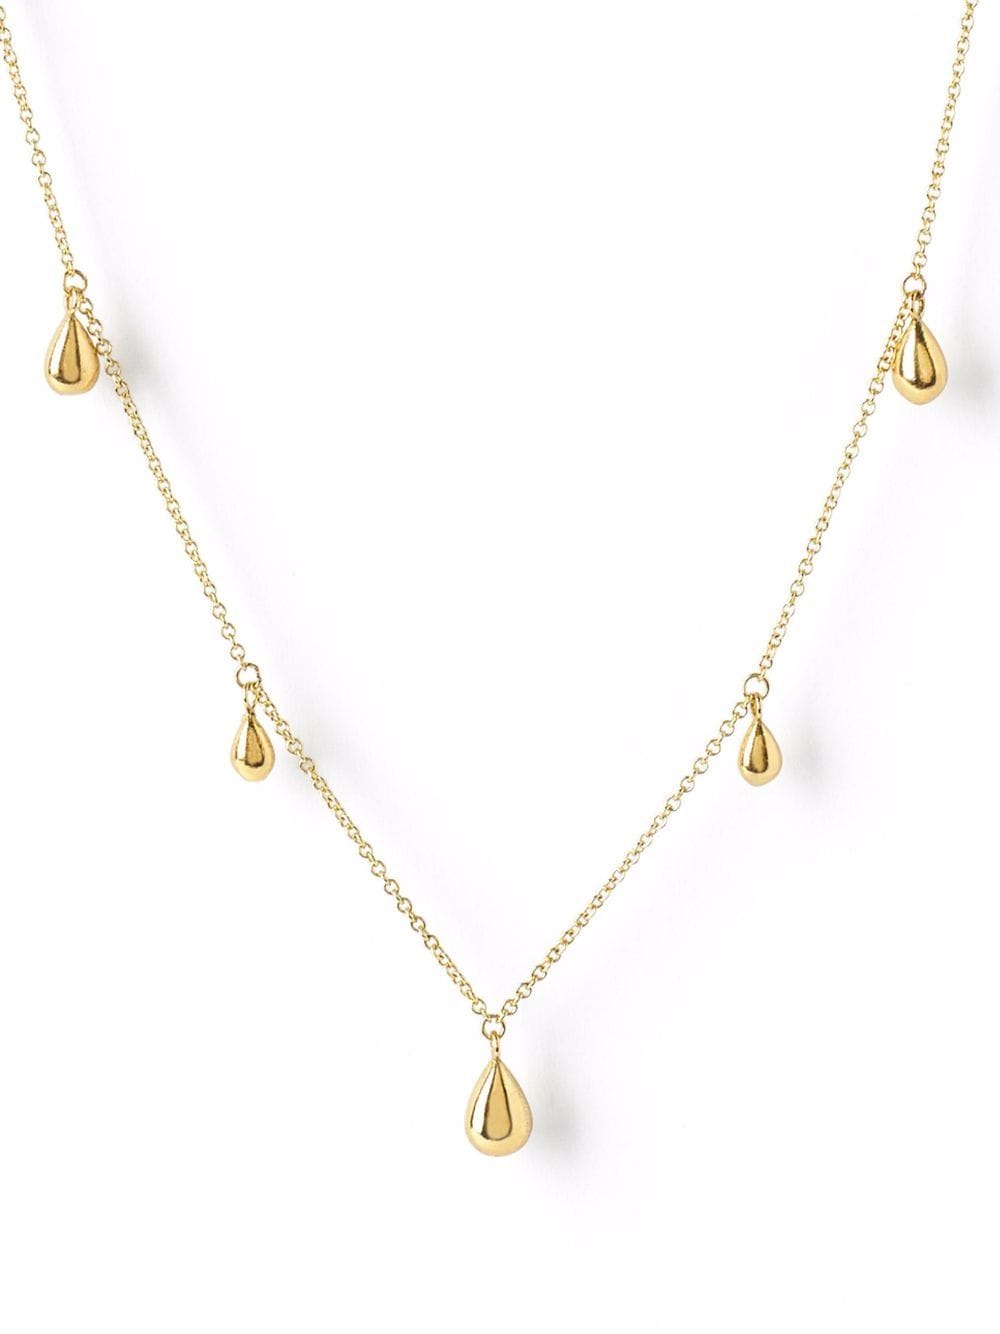 Image 1 of THE ALKEMISTRY 18kt yellow gold Pear Drop necklace